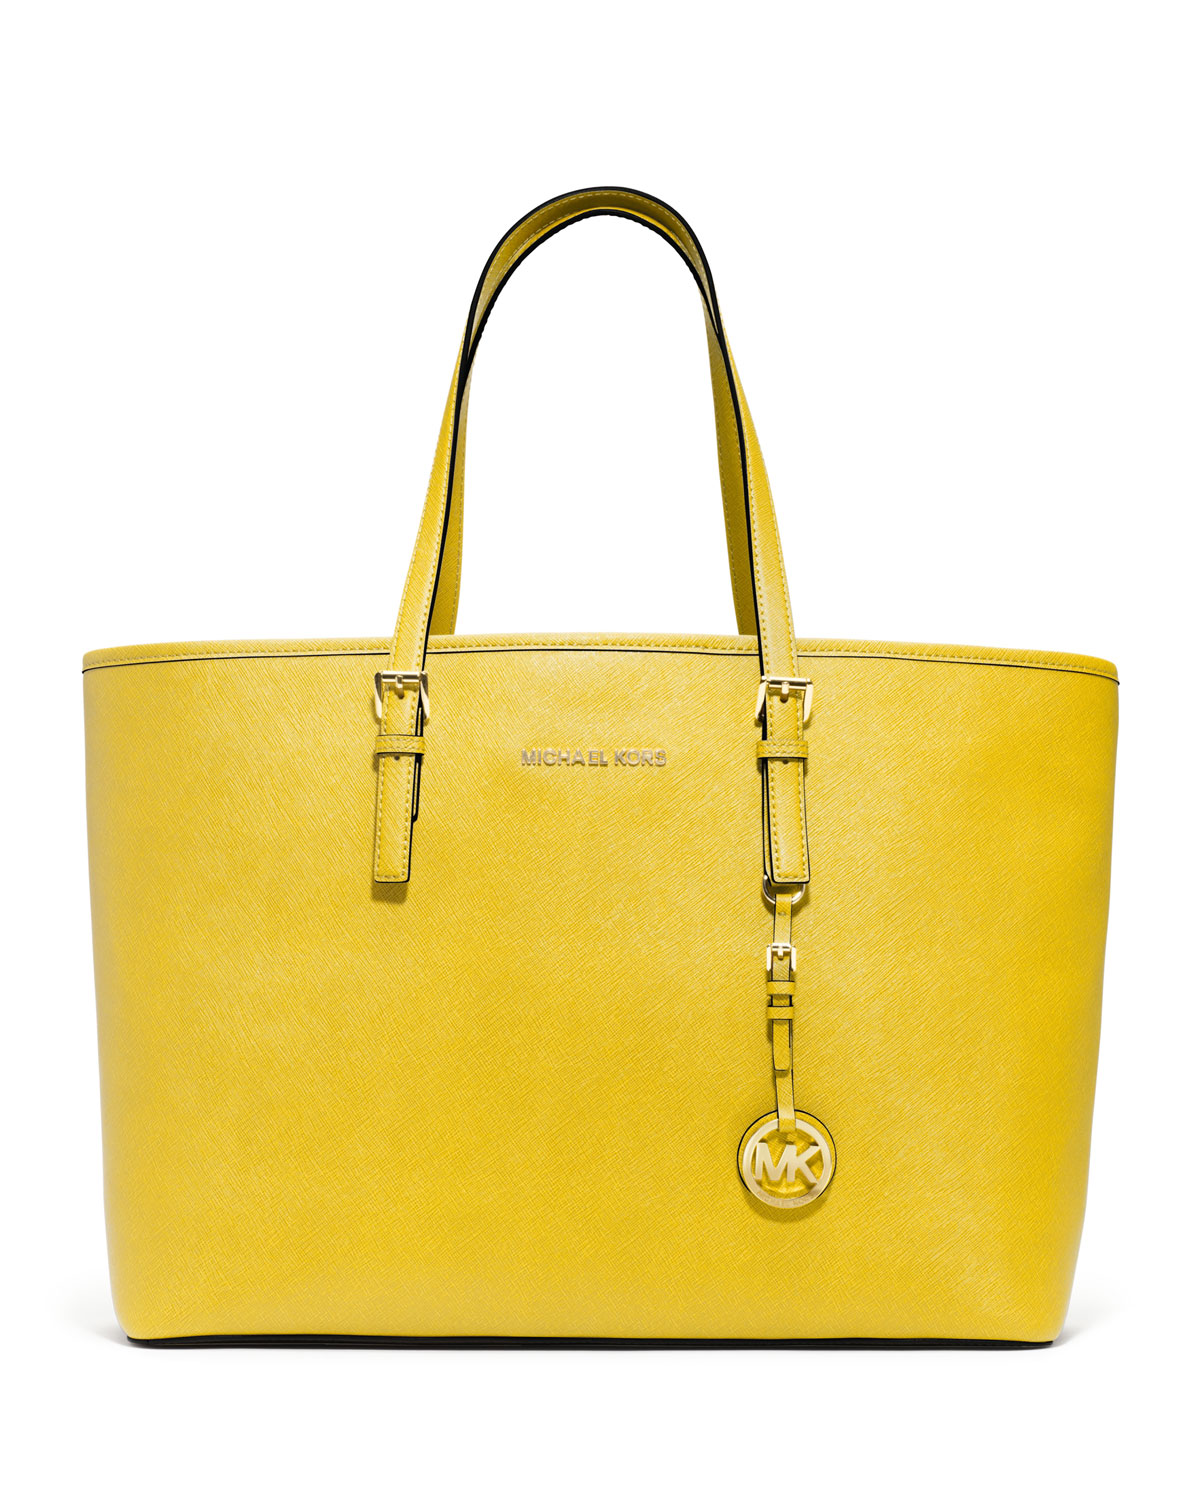 Lyst - Michael Kors Saffiano Tote in Yellow